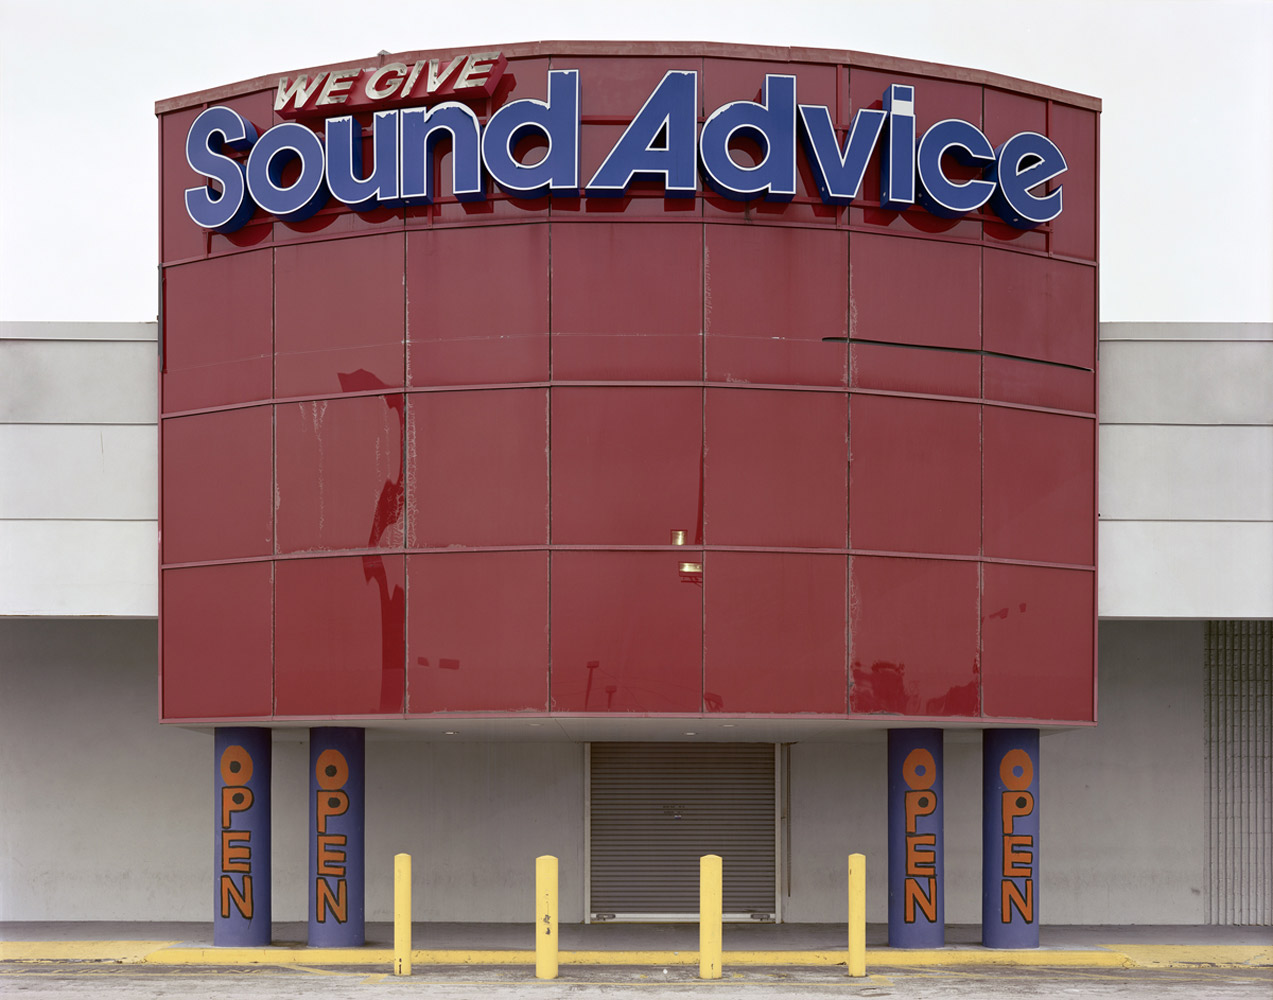 Sound Advice, 2009
                               Sound Advice was a chain of electronics retailers in Florida. This location in Tampa, I scouted from online photographs and went out of my way to photograph it. It's interesting when the retailers leave their signs behind. Signs are often pricey to install or remove and it's a telltale sign of a quick and dramatic bankruptcy when they don't even made amends with the lessor or bank to remove signs.